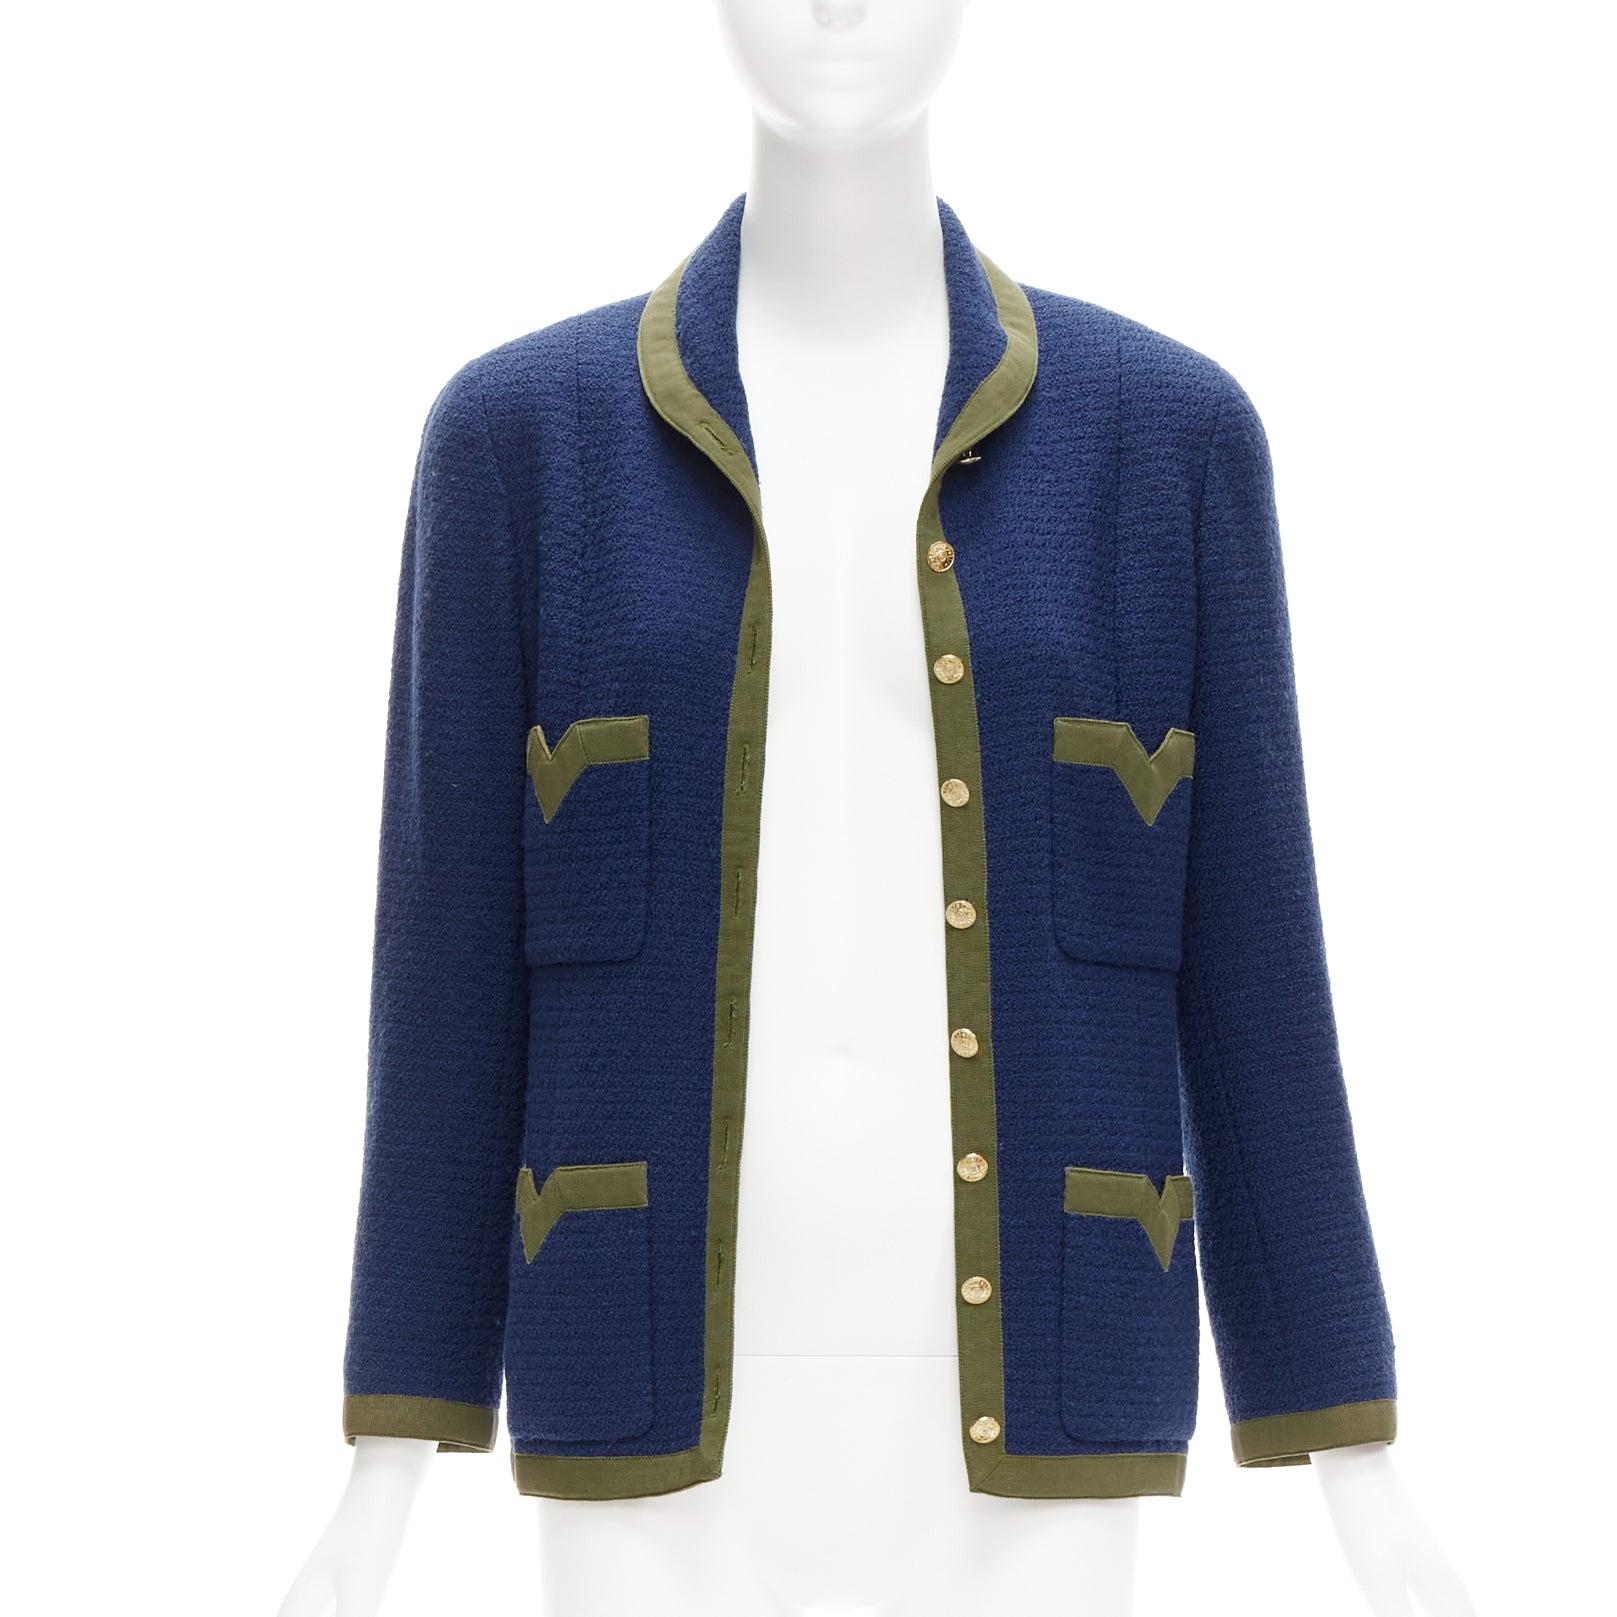 CHANEL Vintage 28931 navy green blue 4 pocket wool tweed jacket FR36 S
Reference: TGAS/D00995
Brand: Chanel
Designer: Karl Lagerfeld
Model: 289331
Material: Wool
Color: Navy, Green
Pattern: Solid
Closure: Button
Lining: Blue Silk
Extra Details: Gold